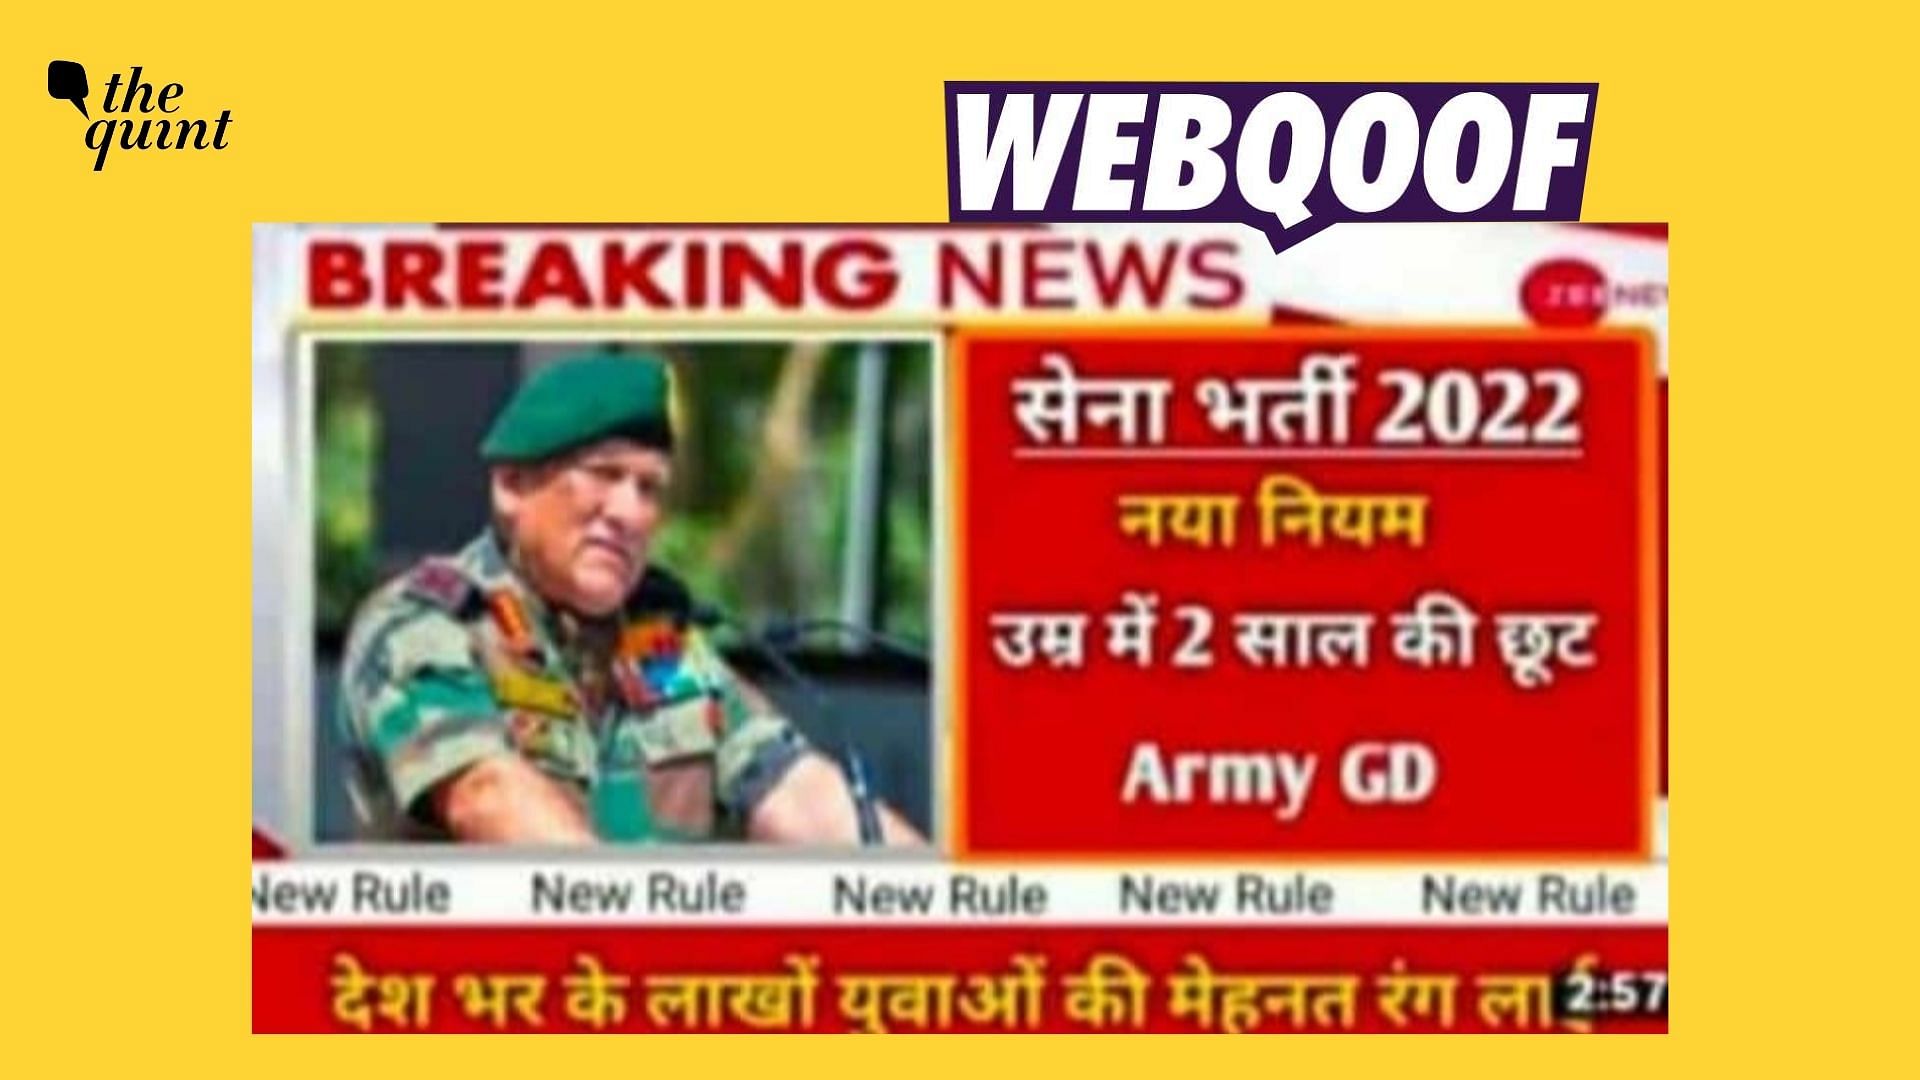 <div class="paragraphs"><p>A morphed screenshot of a Zee News bulletin was circulated on social media to falsely claim that the age criteria for Army recruitment has been relaxed.</p></div>